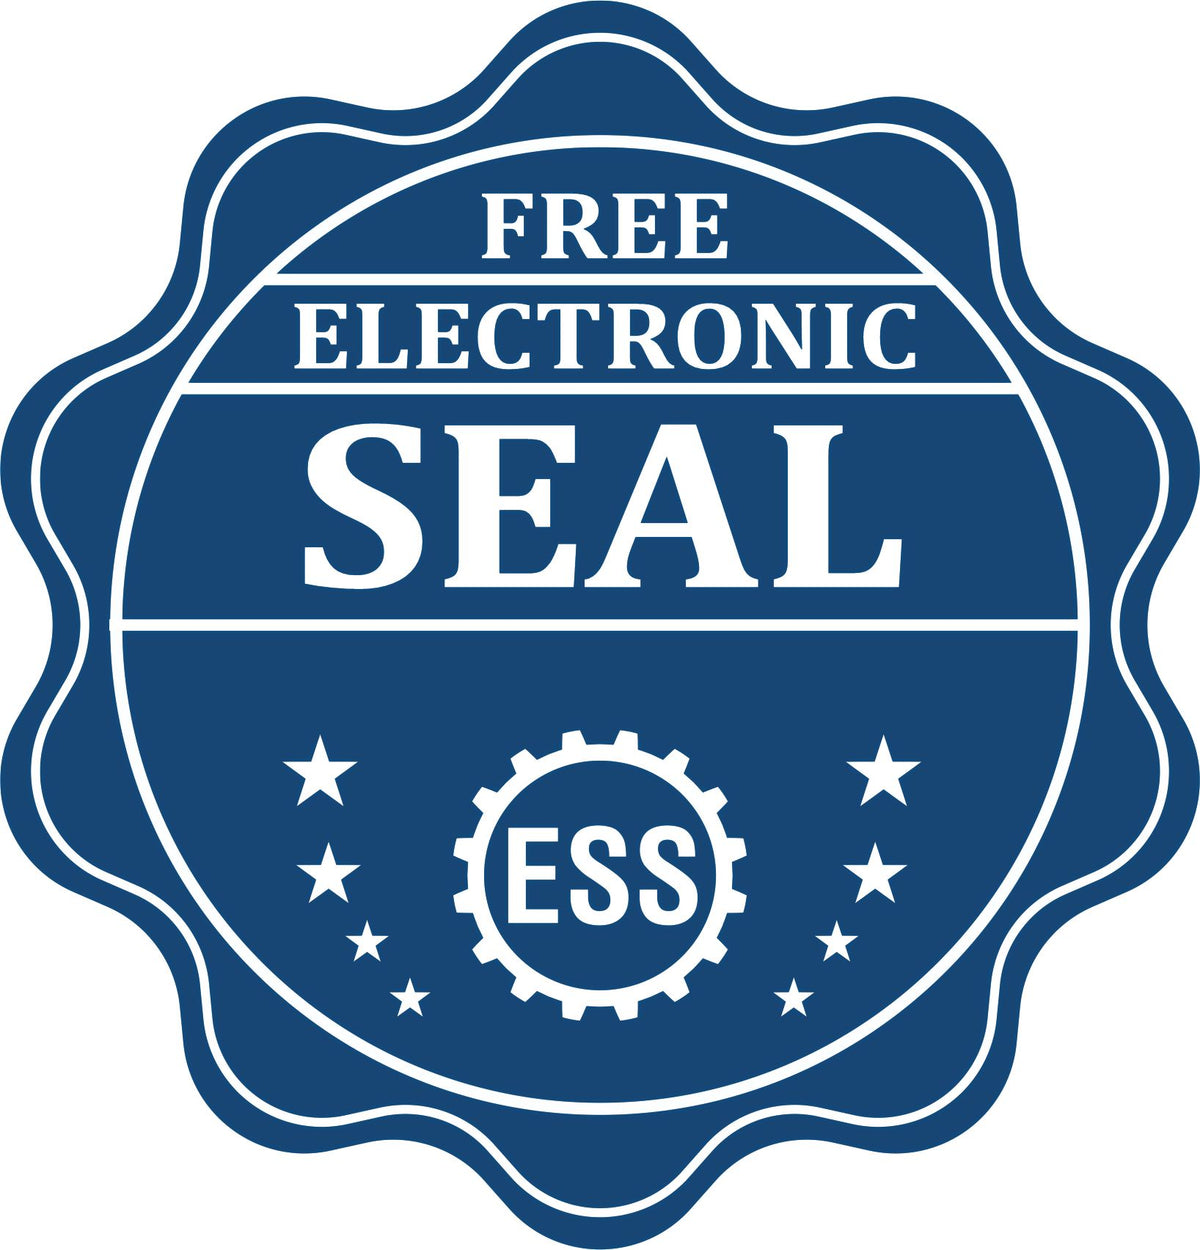 A badge showing a free electronic seal for the Hybrid Arizona Architect Seal with stars and the ESS gear on the emblem.